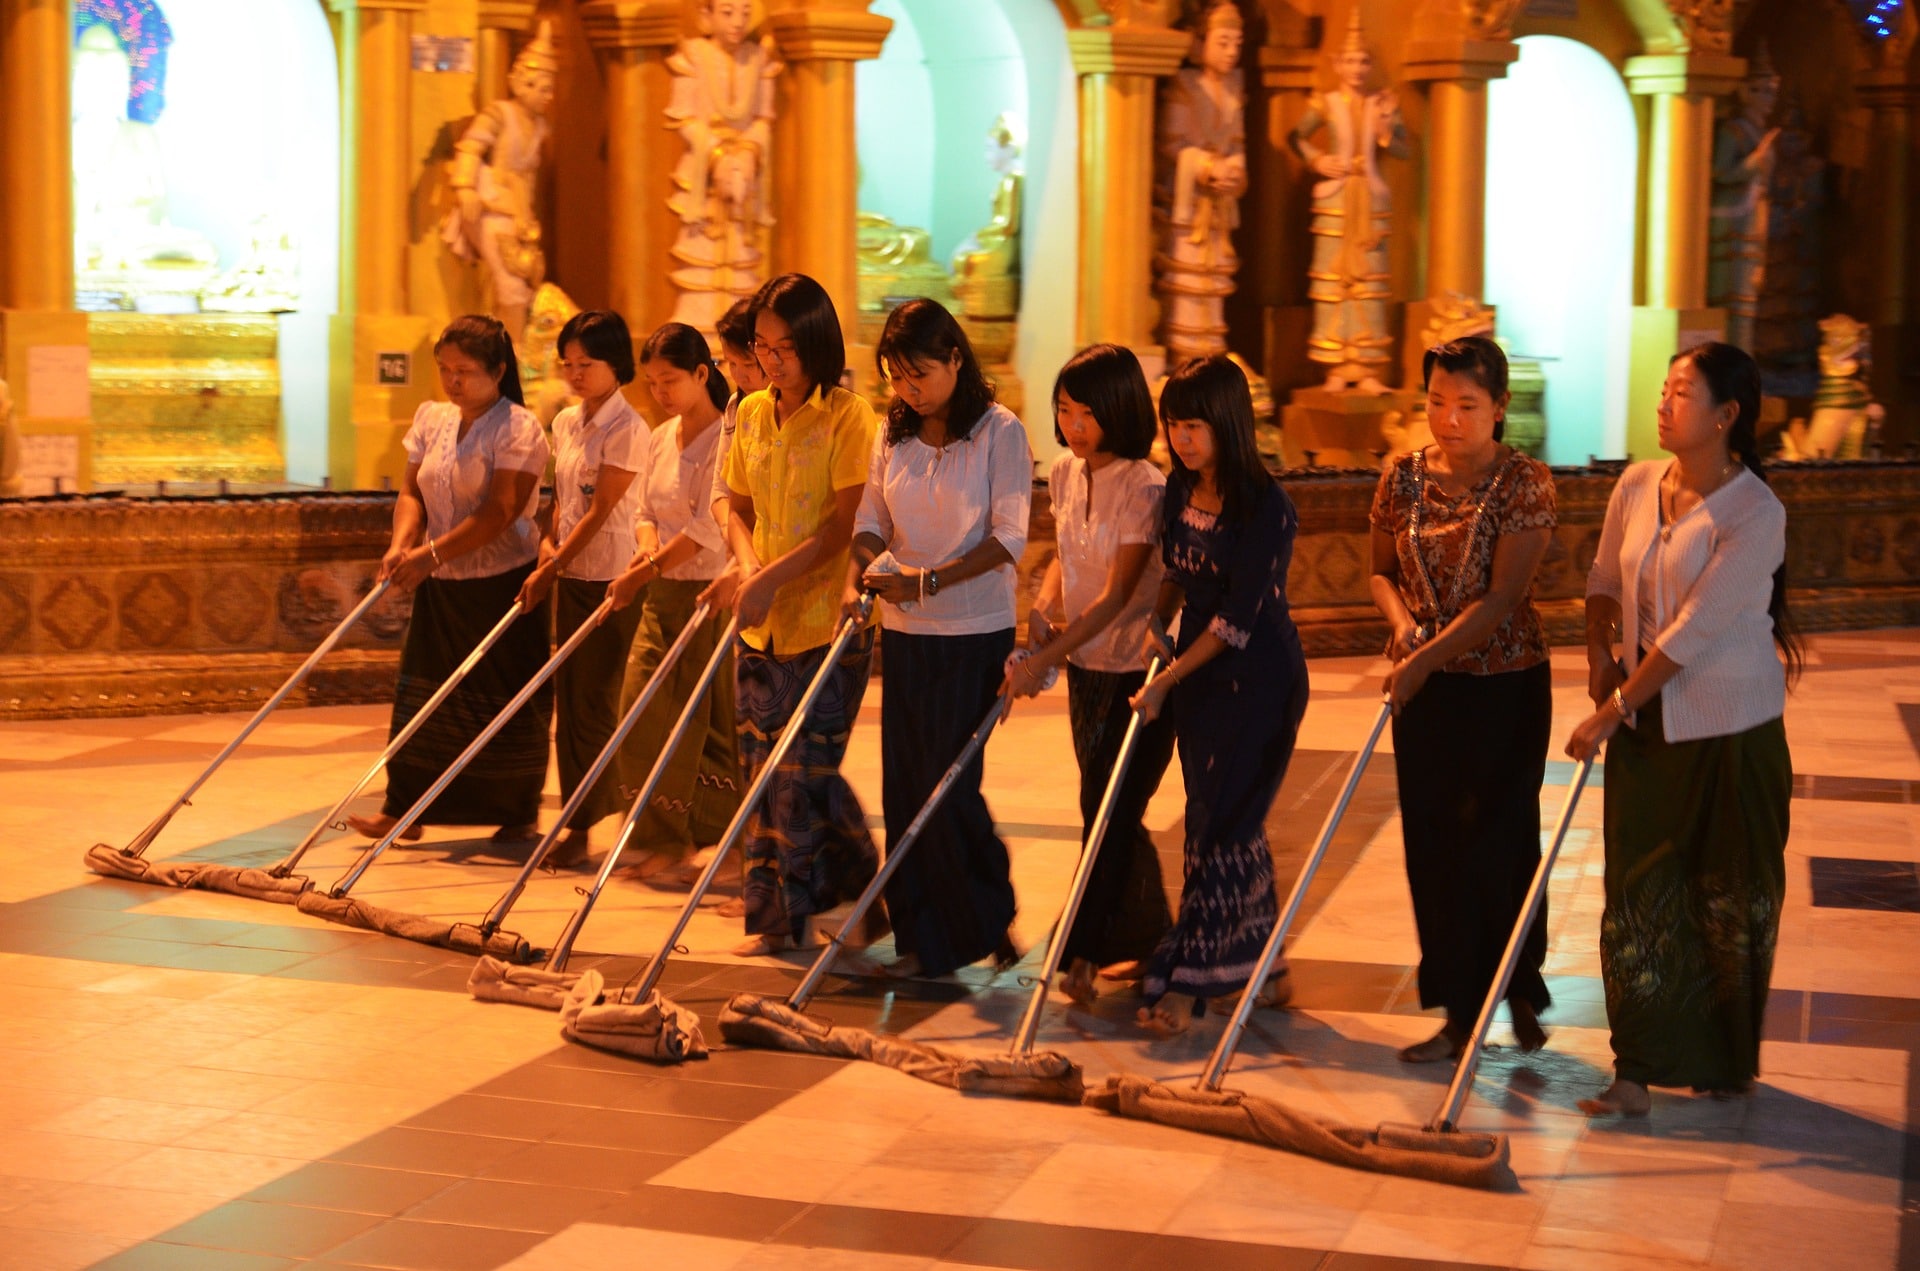 Workers cleaning a floor to earn a small income